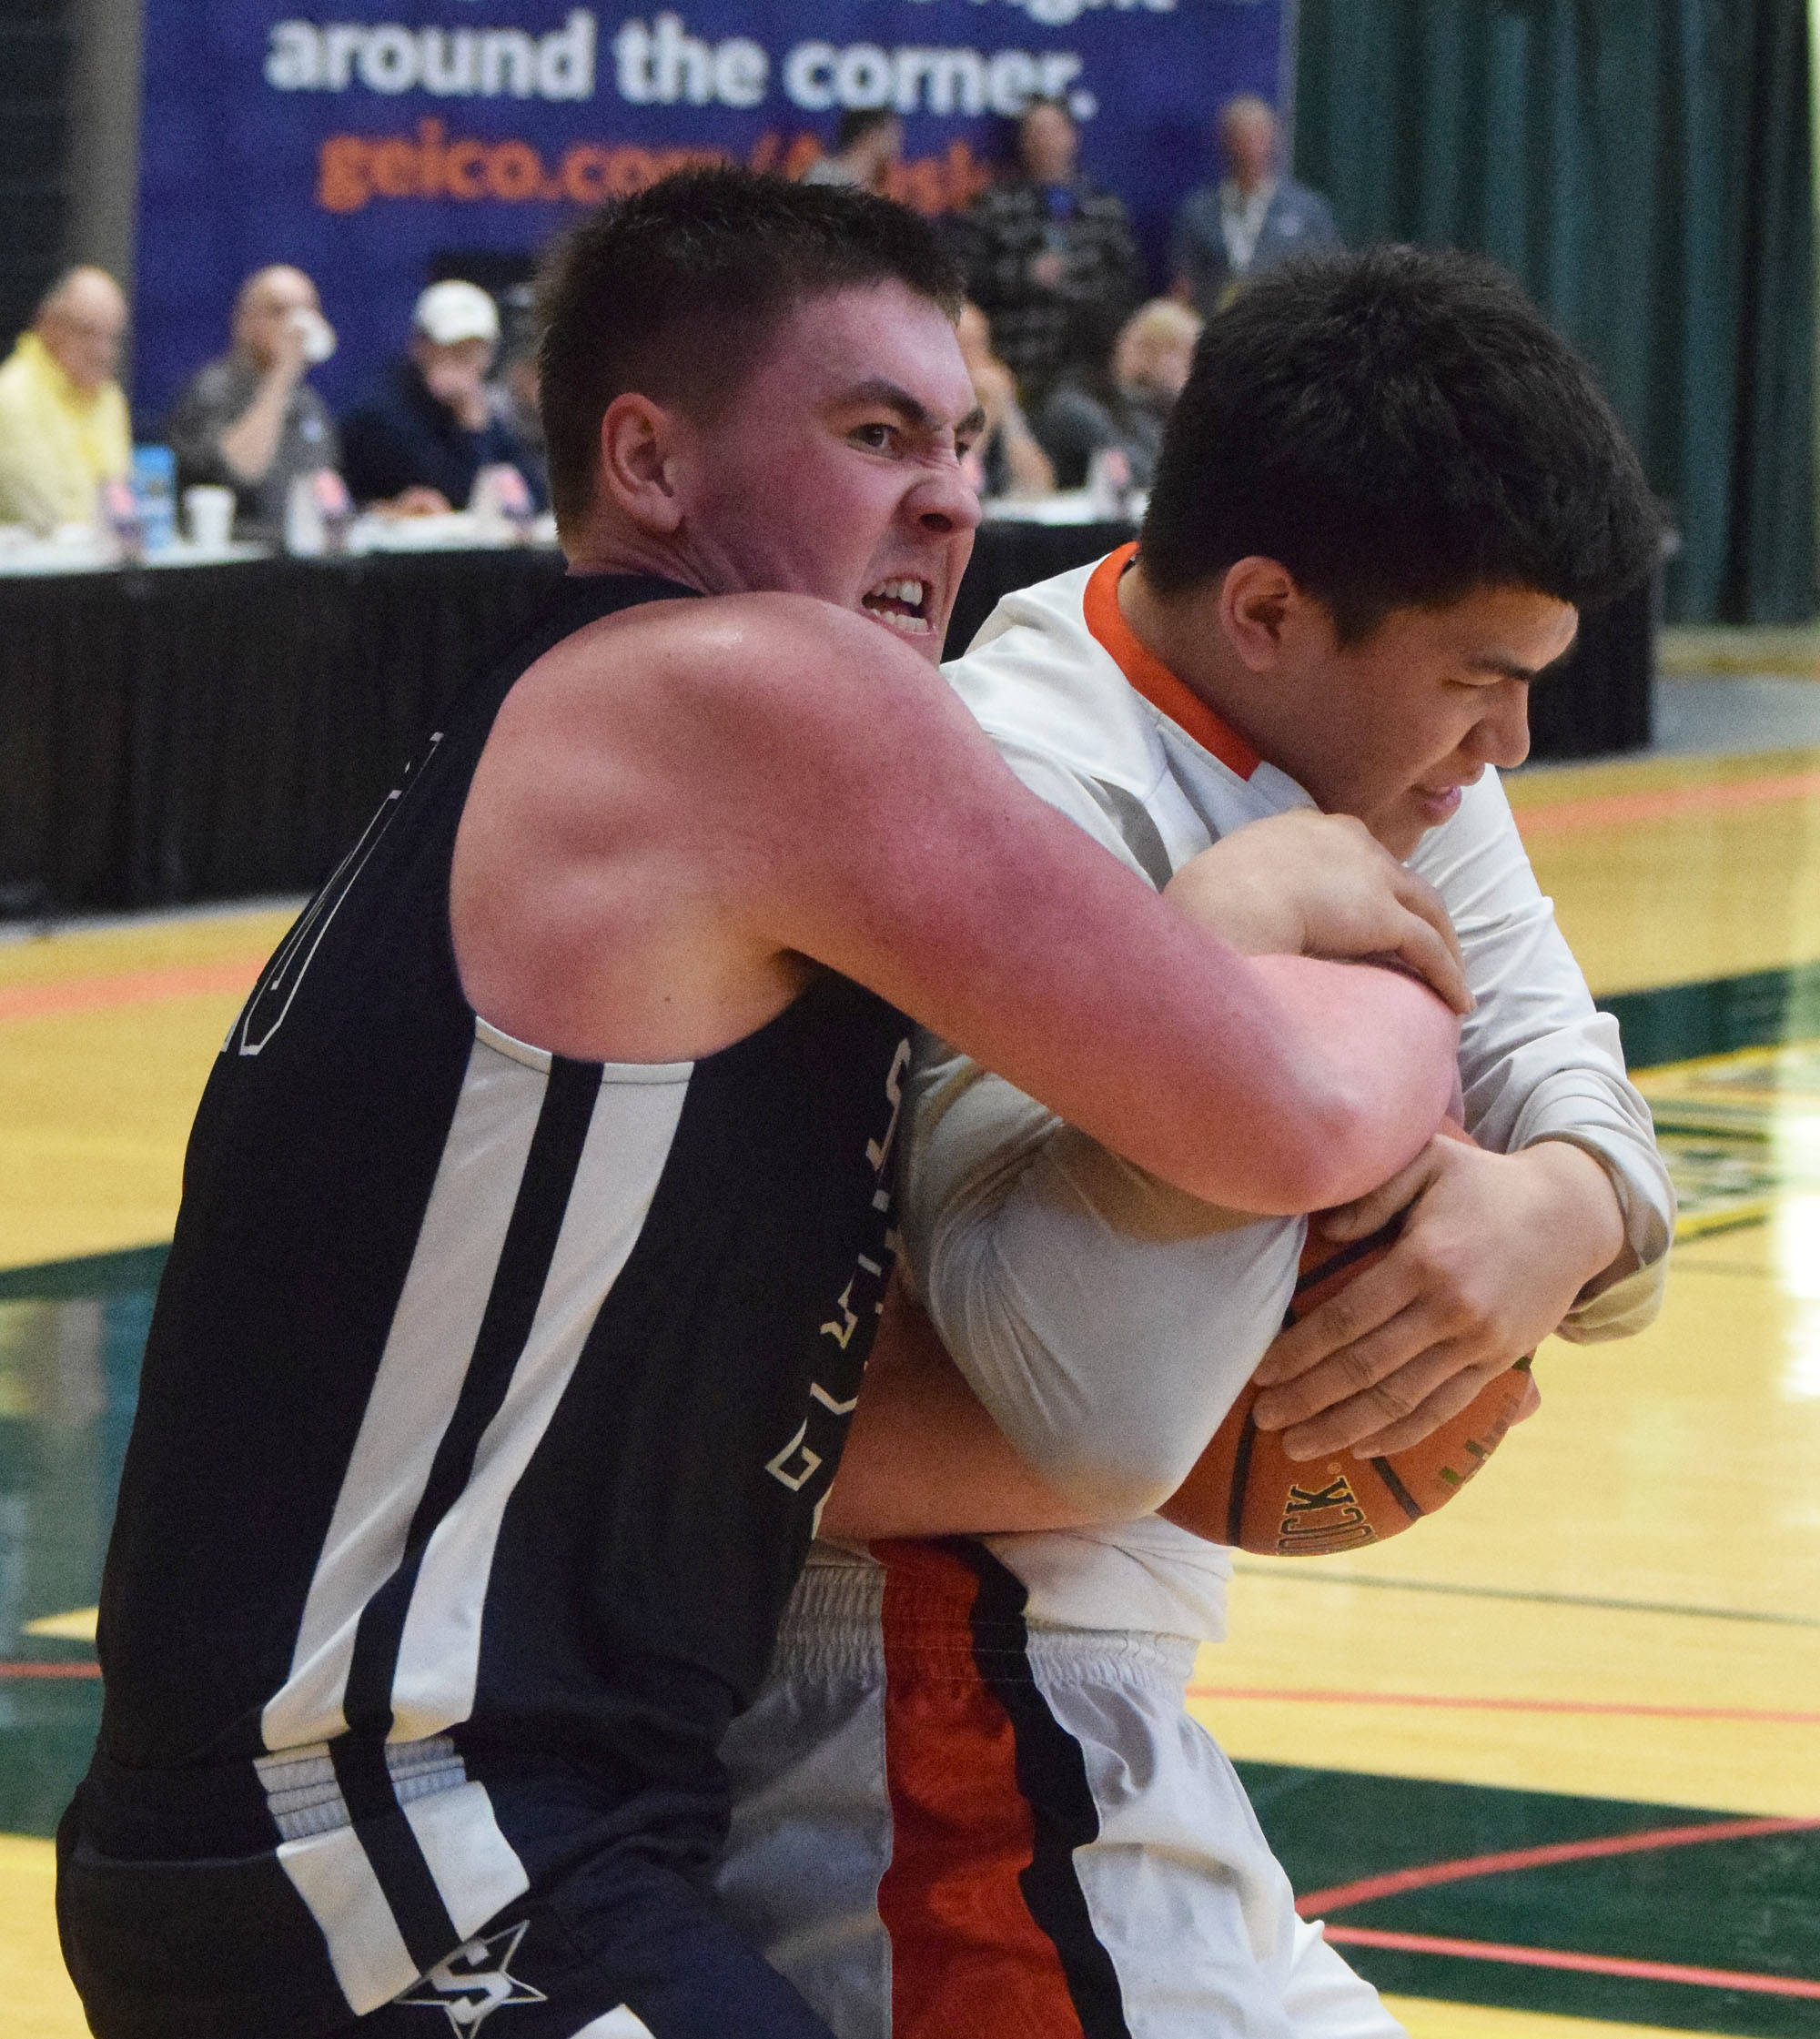 Soldotna’s Brock Kant (left) wrestles with West’s Anthony Snow for a rebound Thursday, Mar. 21, 2019, at the Class 4A state championship tournament at the Alaska Airlines Center in Anchorage. (Photo by Joey Klecka/Peninsula Clarion)